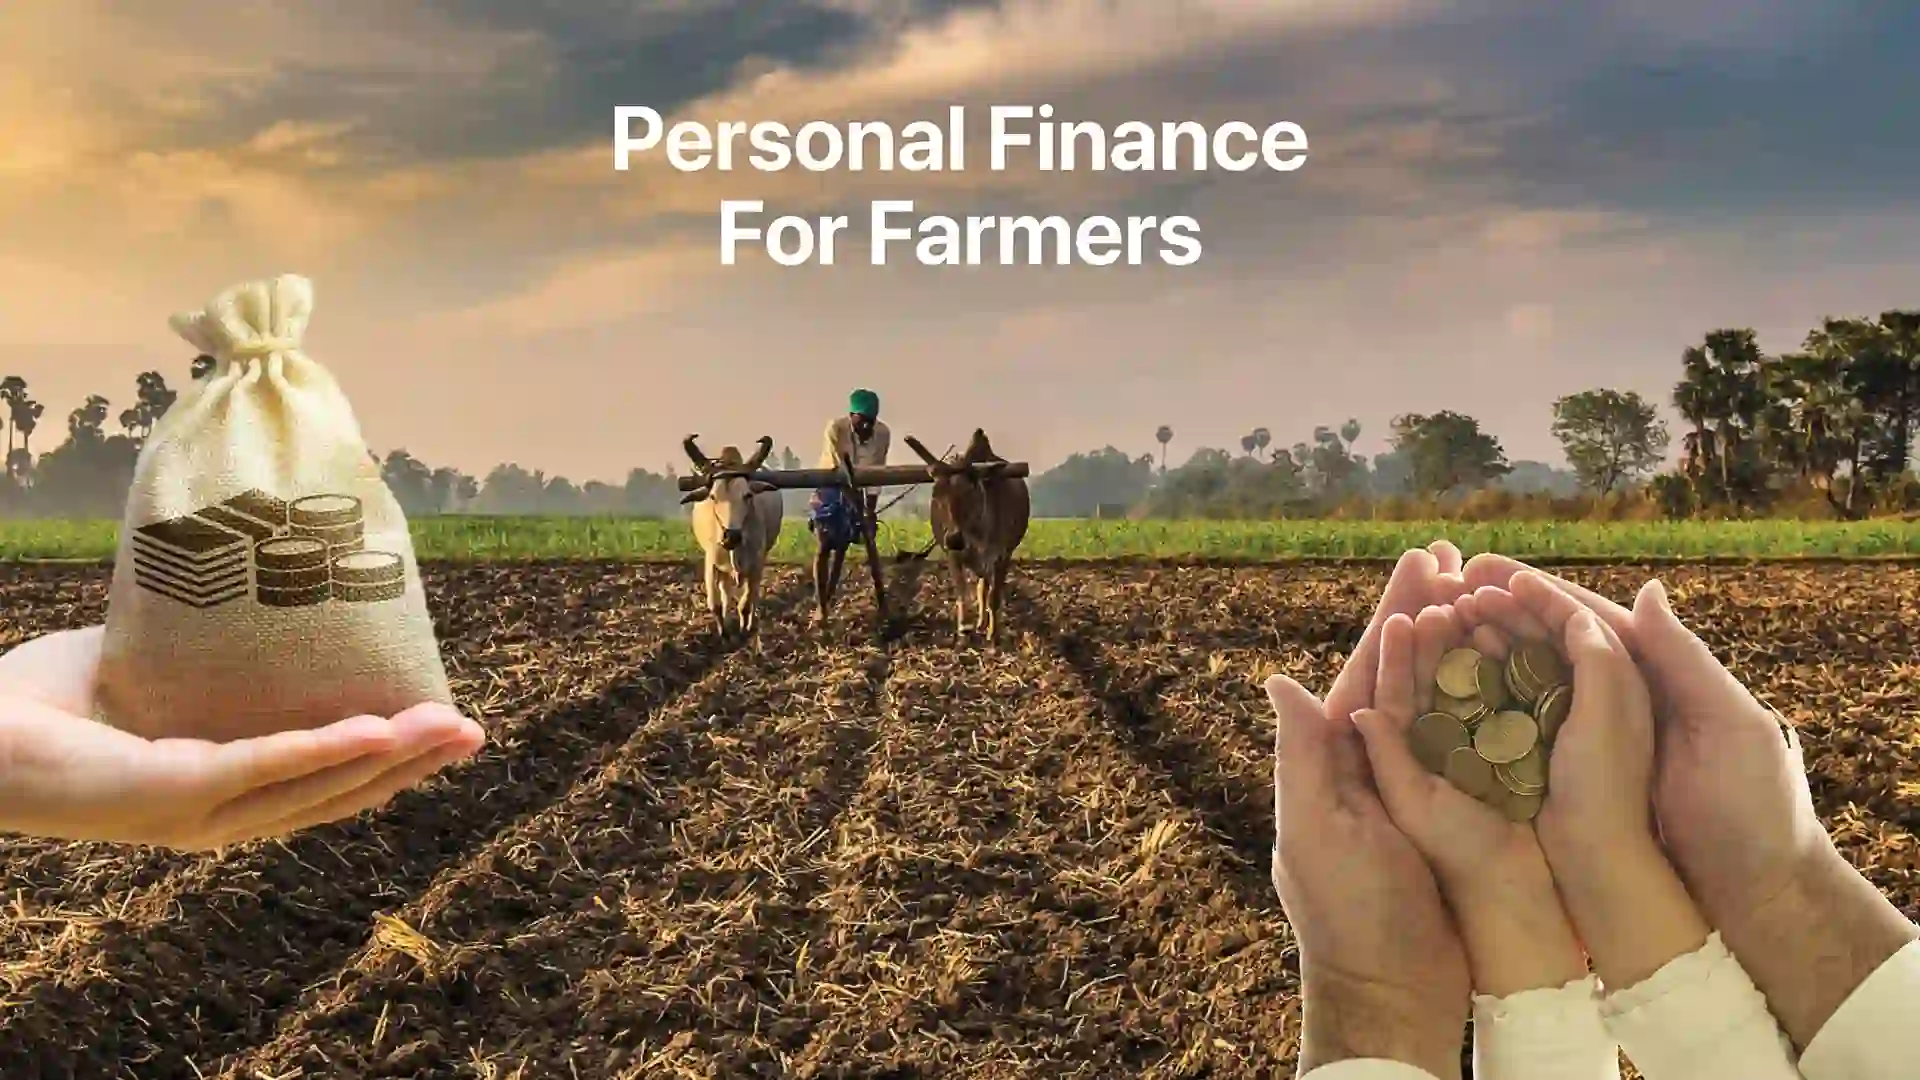 Course Trailer: Personal Finance Management for Farmers - A Practical Guide. Watch to know more.